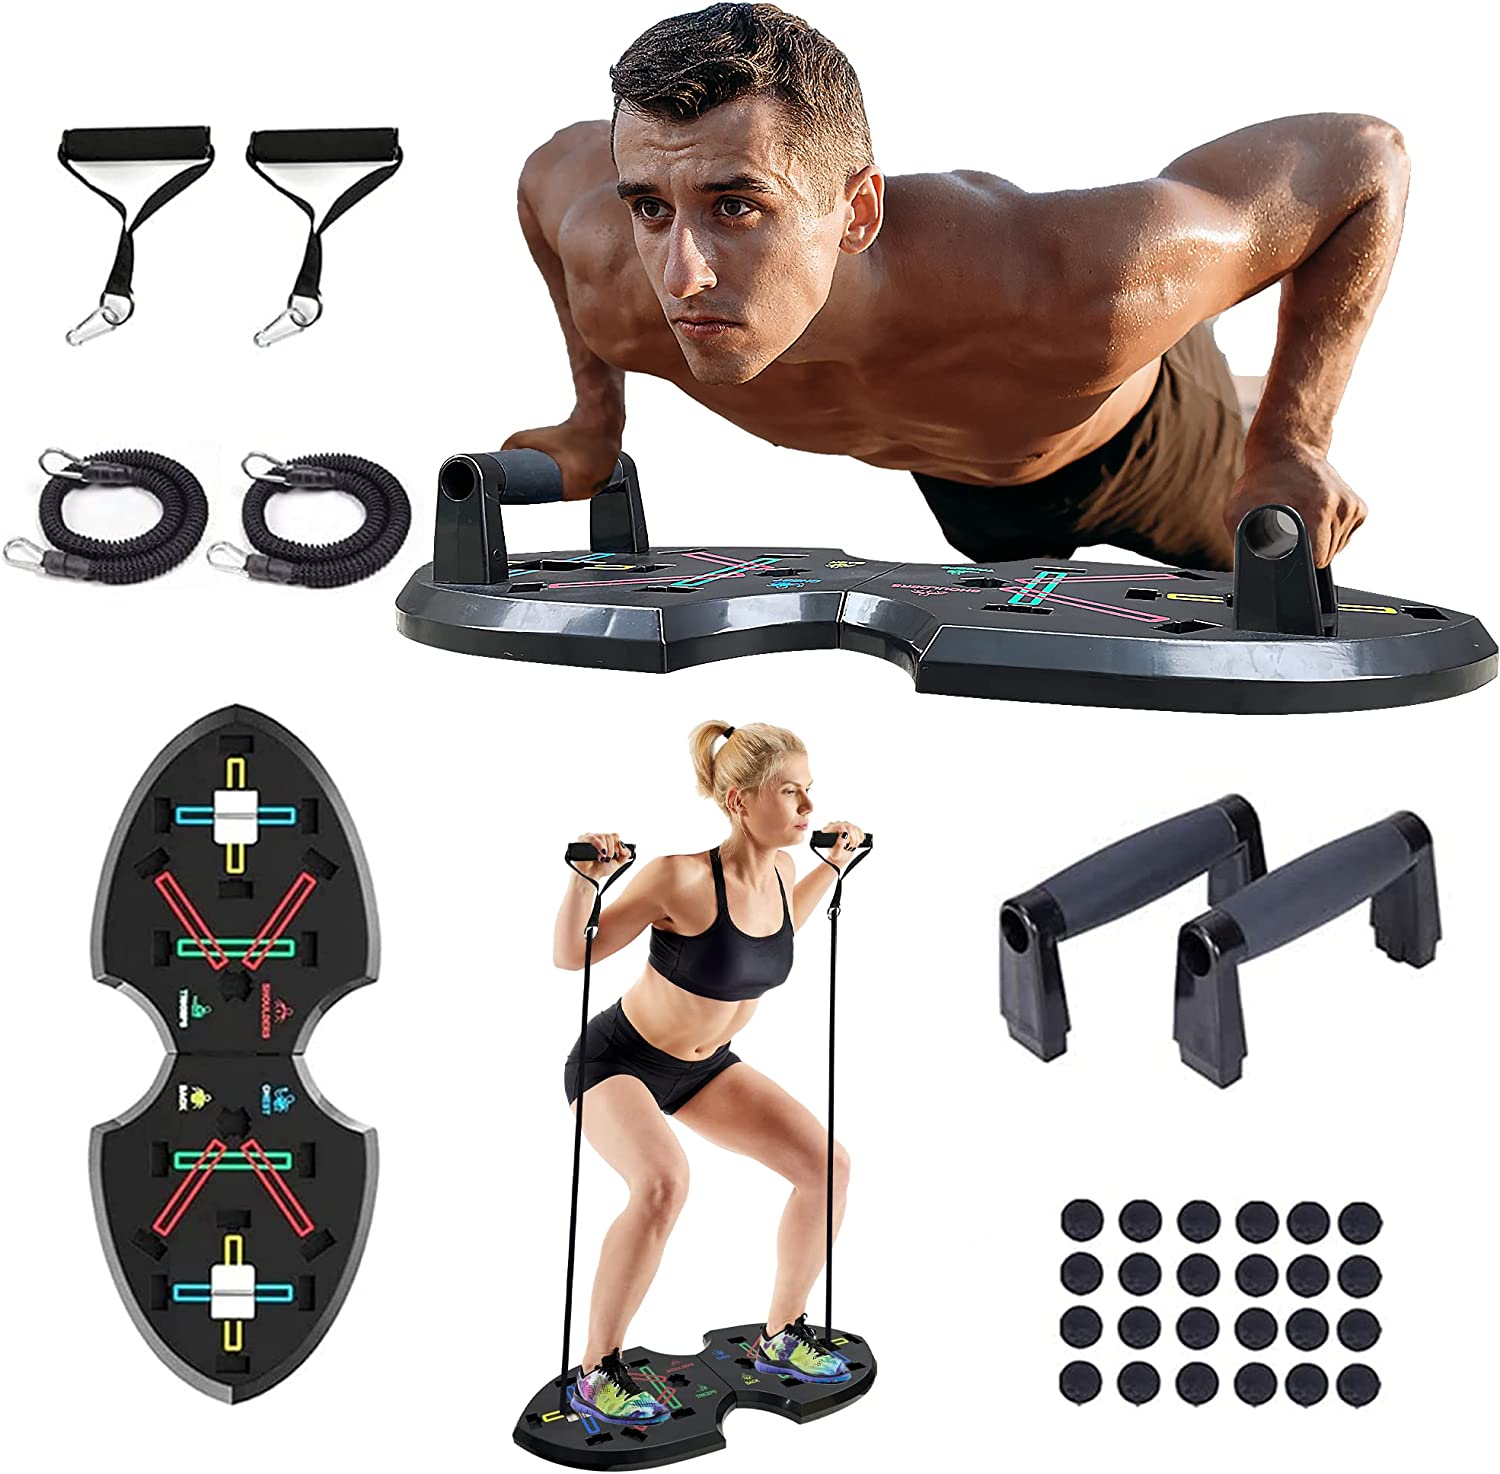 Strength Training Equipment with Resistance Bands Full Body Workout Machine Safe Push-Up Handle Exercise Chest Hotwave Push Up Board Arms Home Gym for Men and Women. 